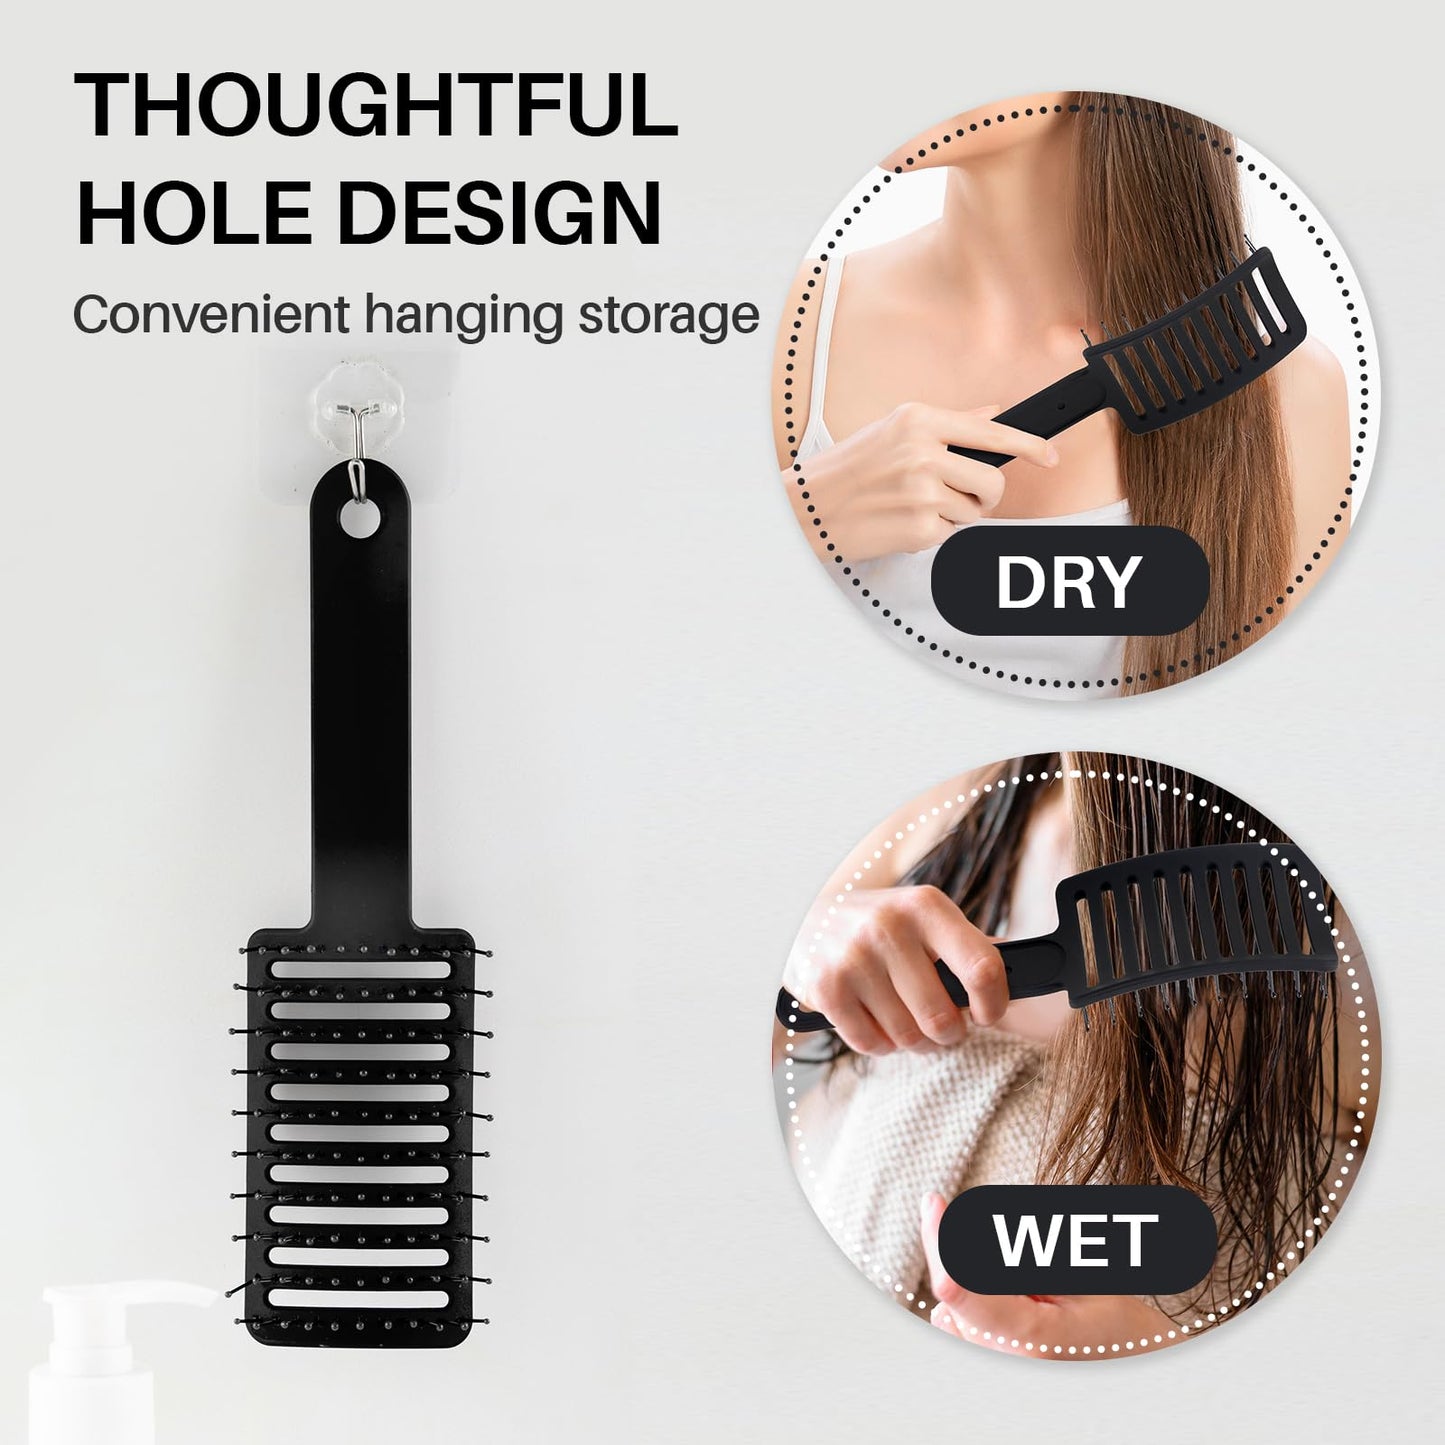 RHOS Curved Vented Hair Brush for Faster Blow Drying/Styling,Paddle Vented Brush for Women&Men-Styling Brush with Nylon Bristles for Curly,Thick,Bangs,Wet and Dry Hair(Black)